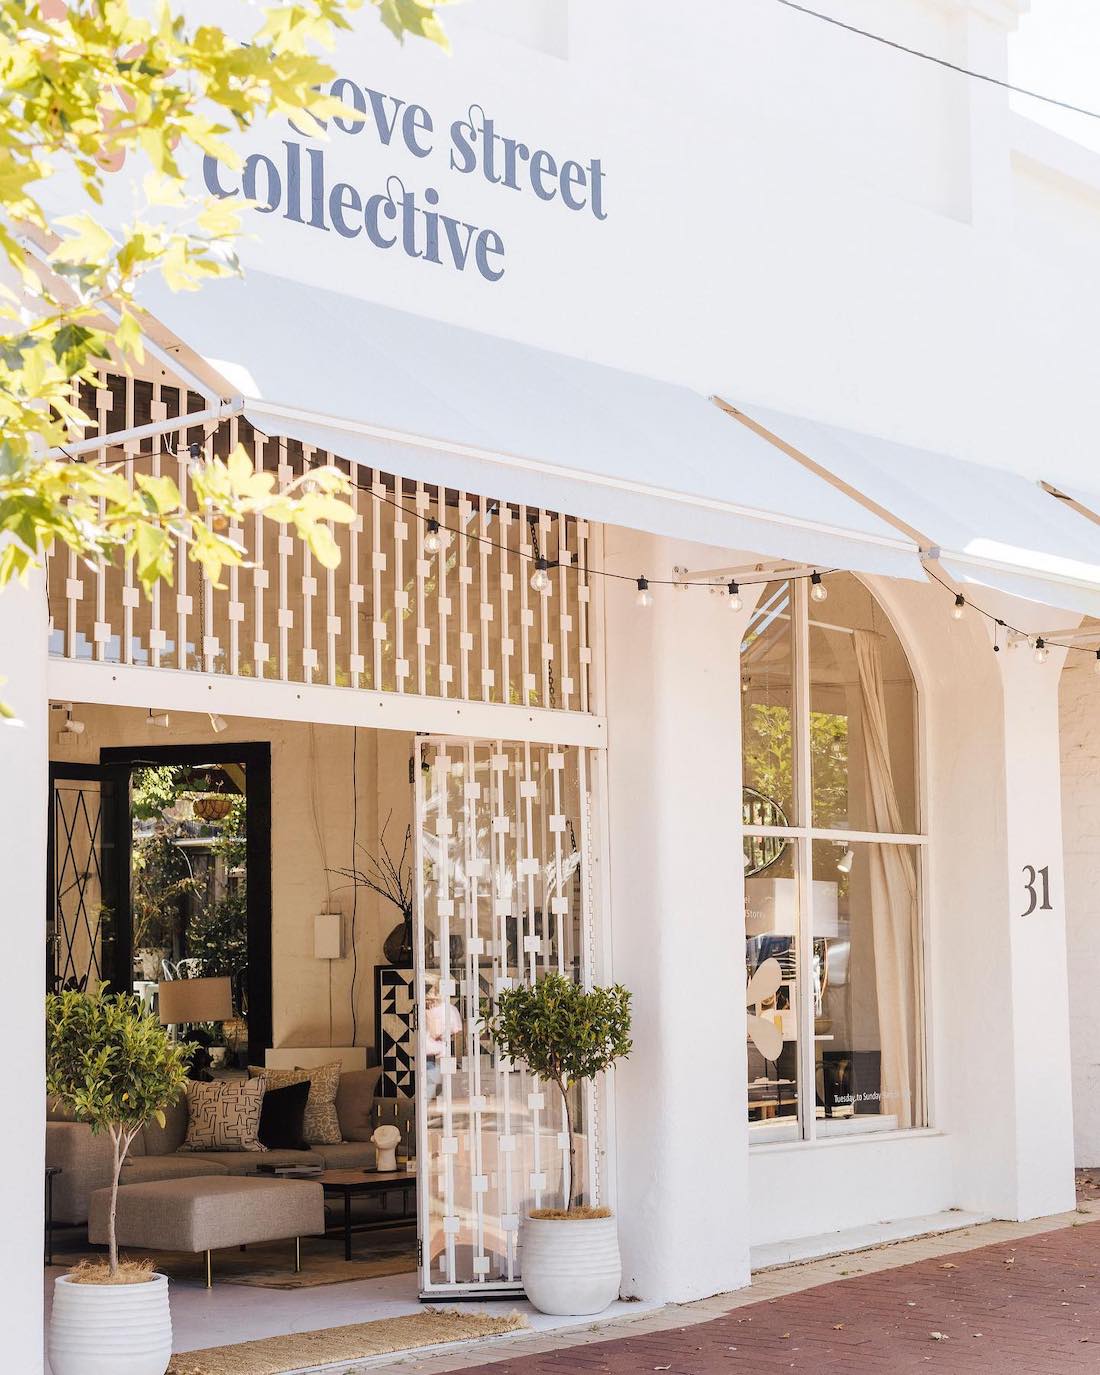 Angove Street Collective _ Perth shopping guide